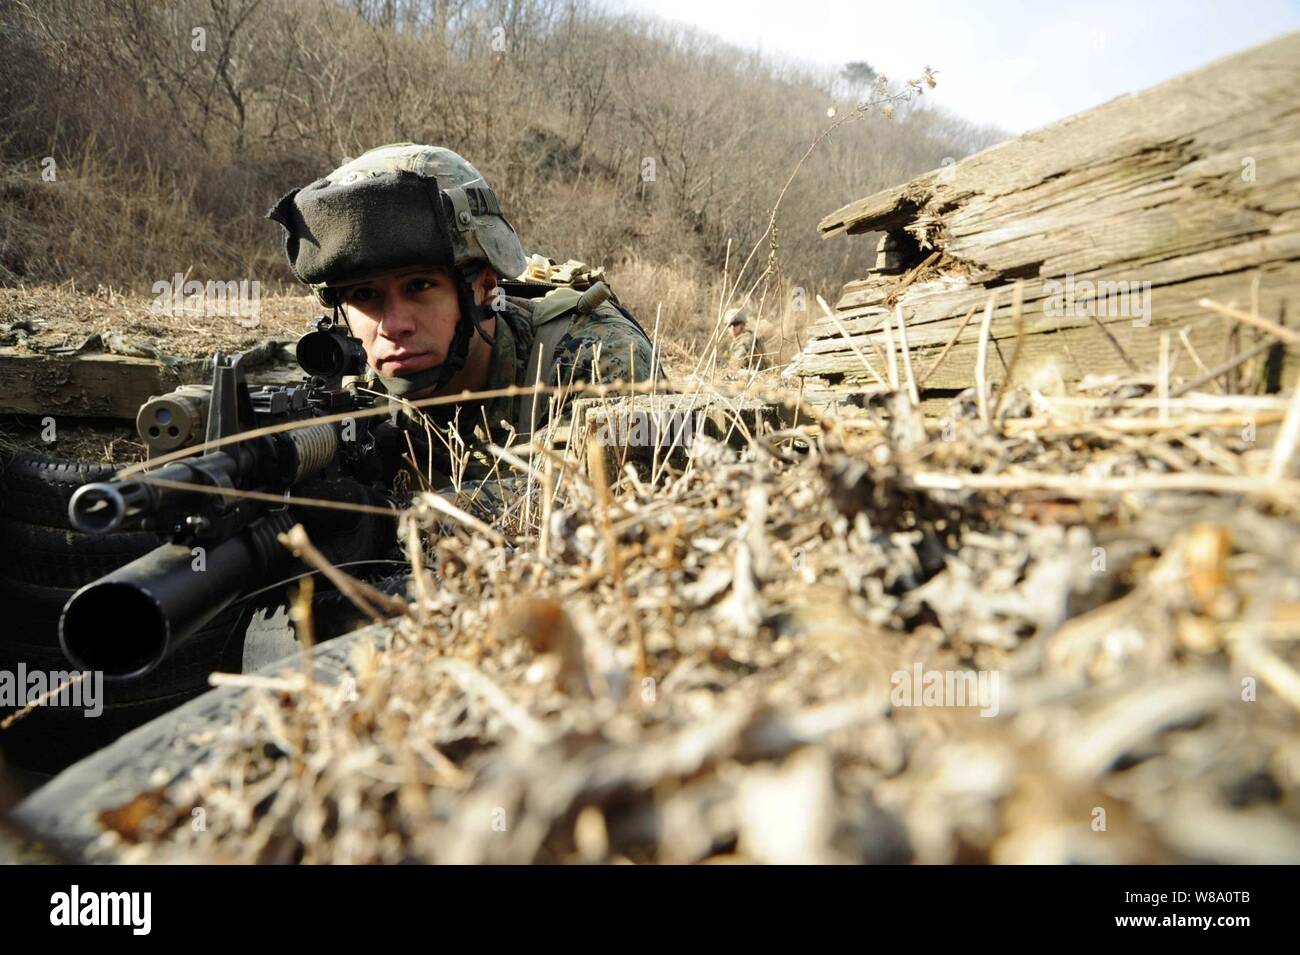 U.S. Marine Corps Lance Cpl. Mario Melendez, assigned to Fleet Antiterrorism Security Team Pacific, stands guard as fellow Marines clear a trench in a tactical movement exercise at Camp Rodriguez, South Korea, on March 1, 2012.  Marines assigned to the antiterrorism security team trained at the Camp Rodriguez live fire complex during the exercise. Stock Photo